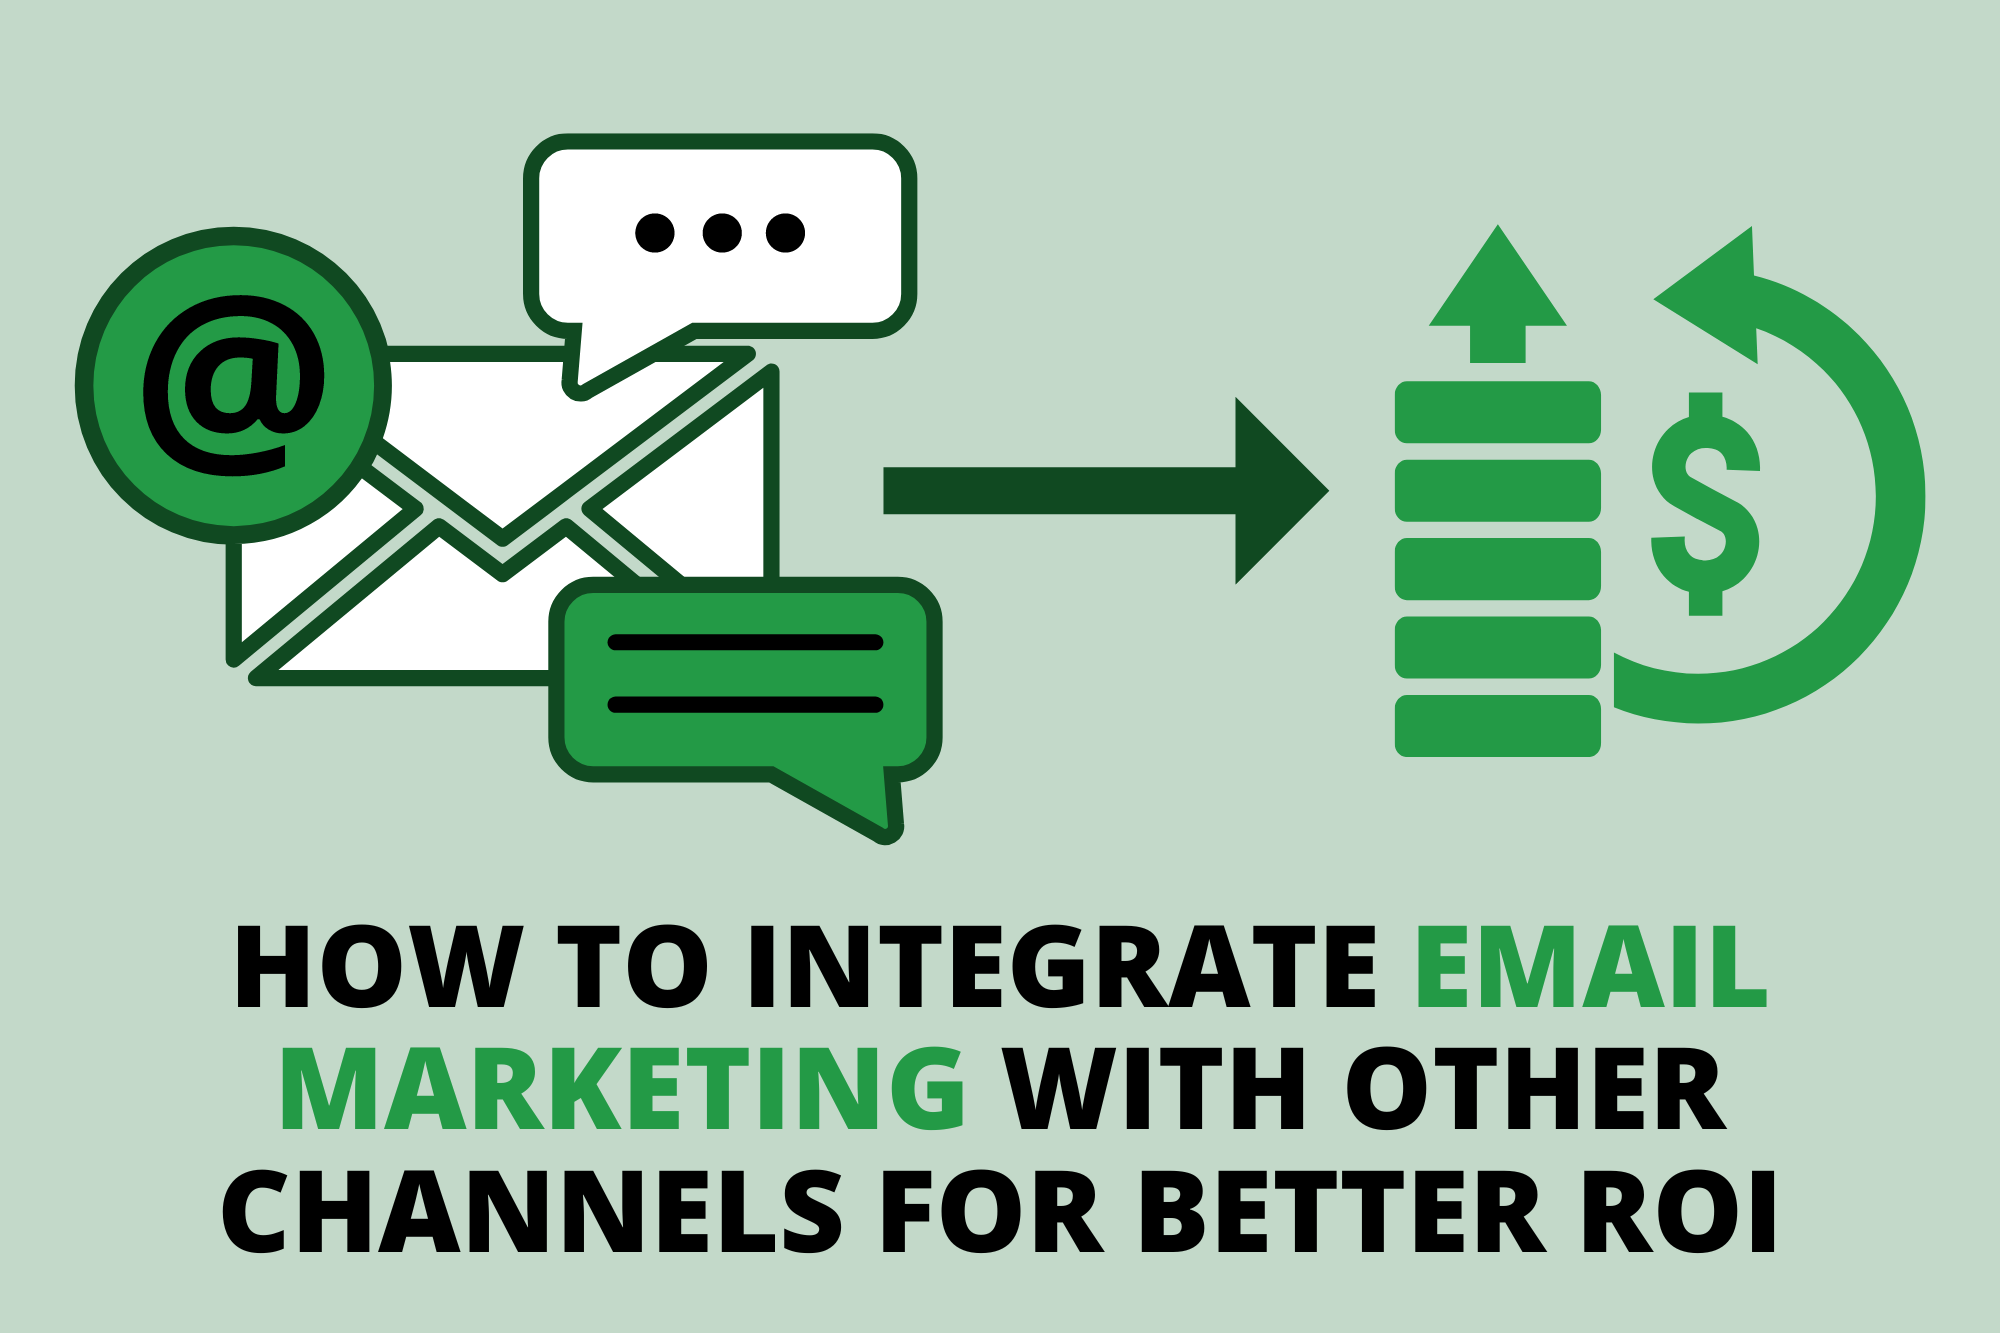 How To Integrate Email Marketing With Other Channels For Better ROI